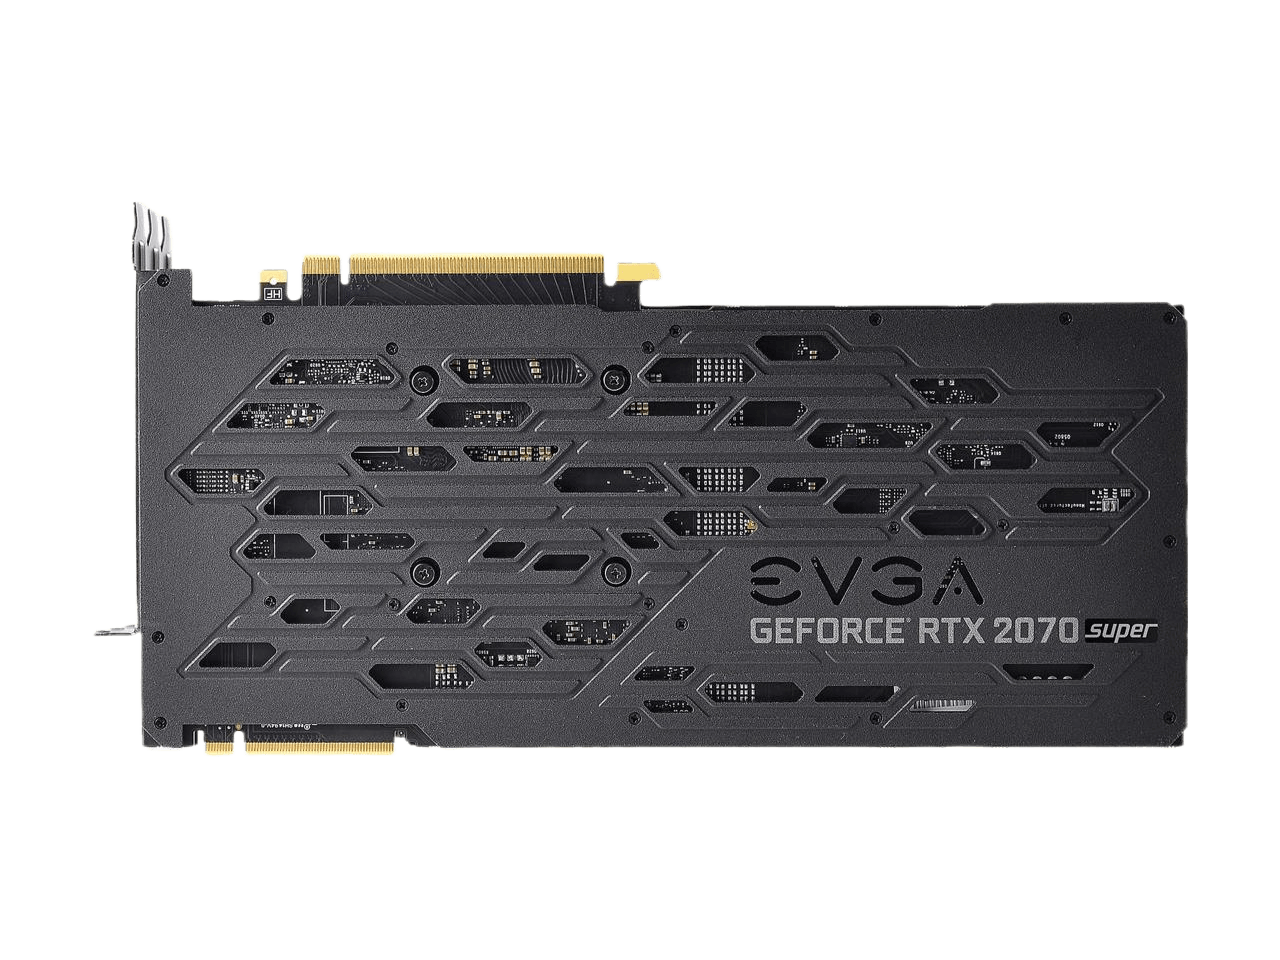 EVGA GeForce RTX 2070 SUPER FTW3 ULTRA GAMING 8GB GDDR6 iCX2 Technology RGB LED Metal Backplate Video Graphics Card 08G-P4-3277-KR